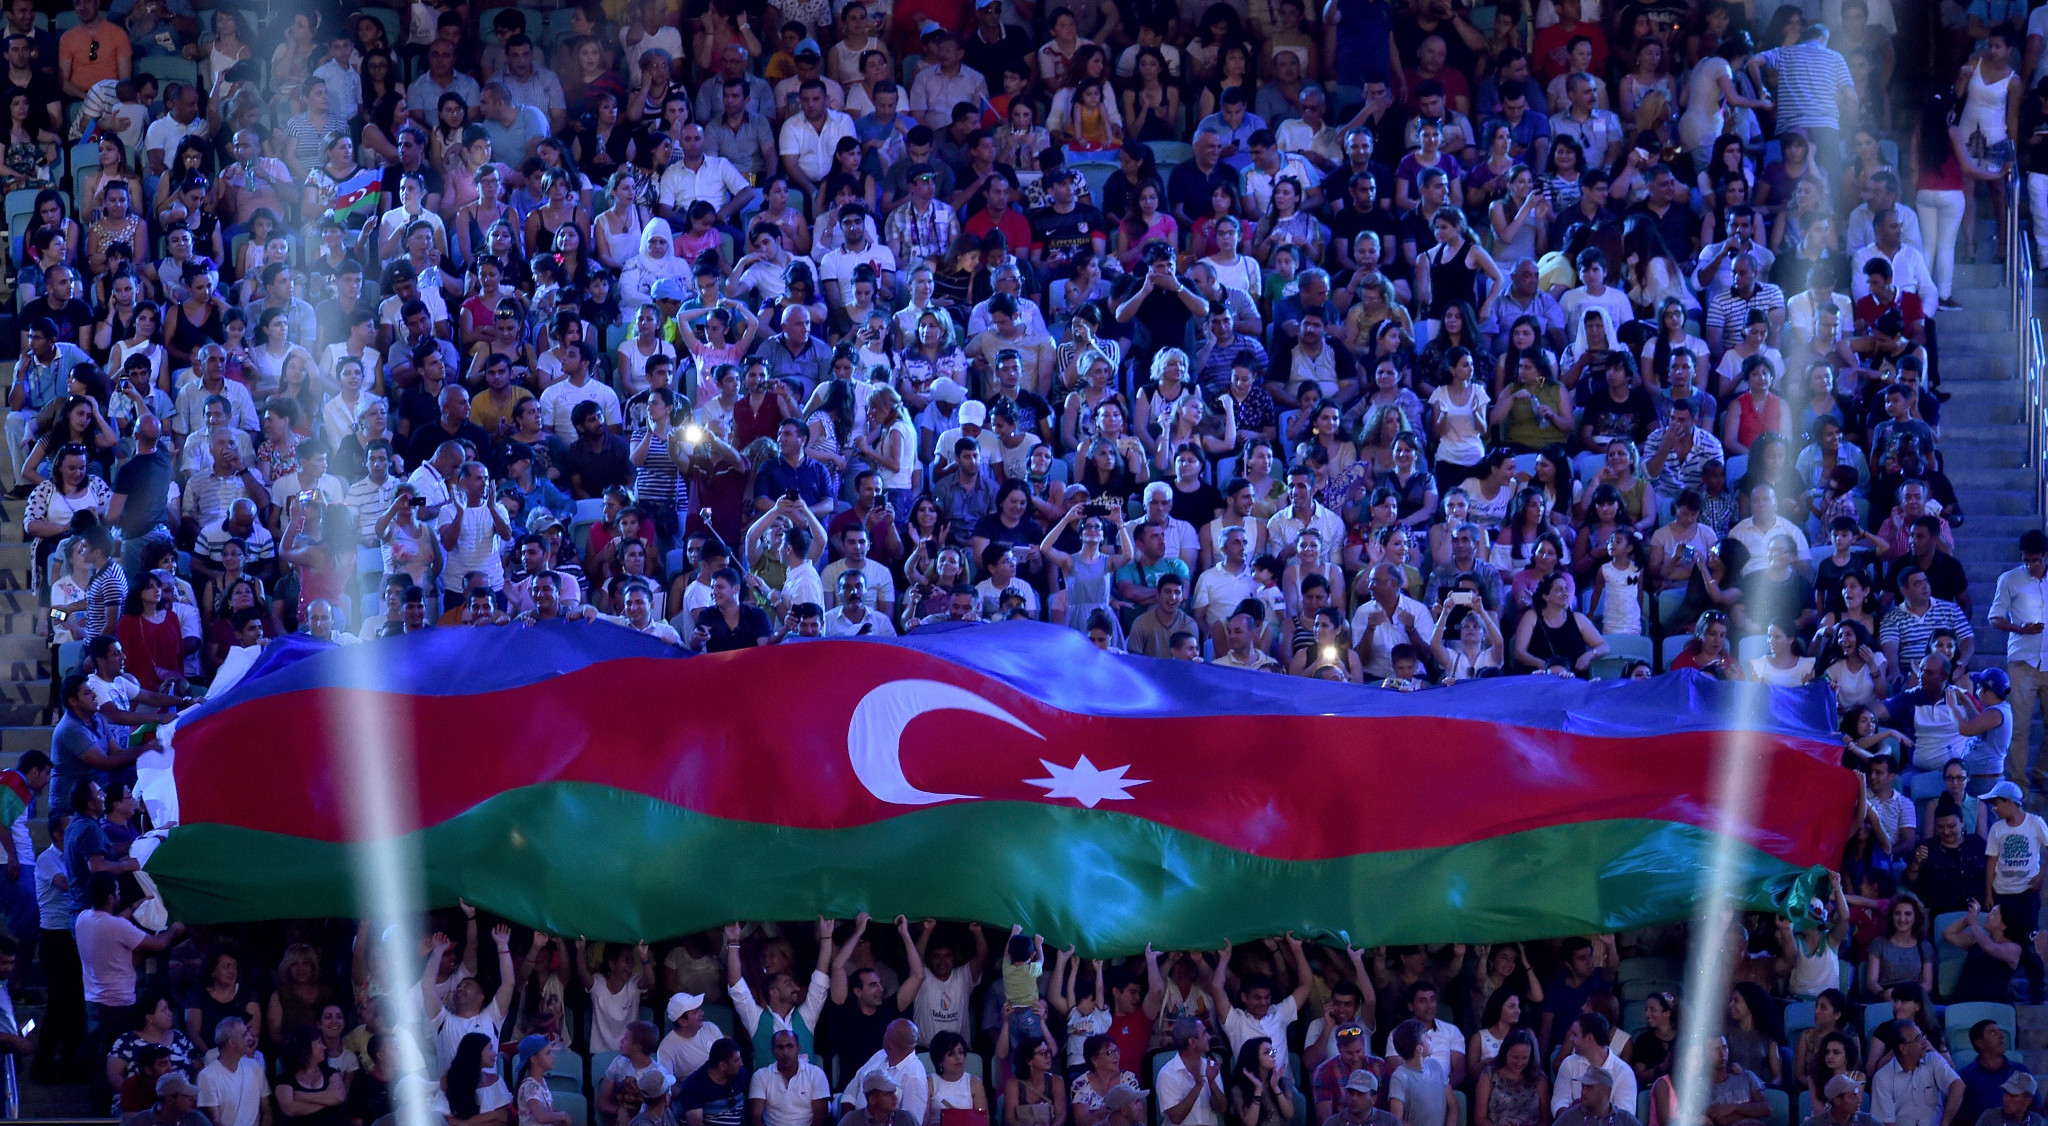 Around 170,000 tourists reportedly visited Azerbaijan during the 2015 European Games in Baku ©Getty Images